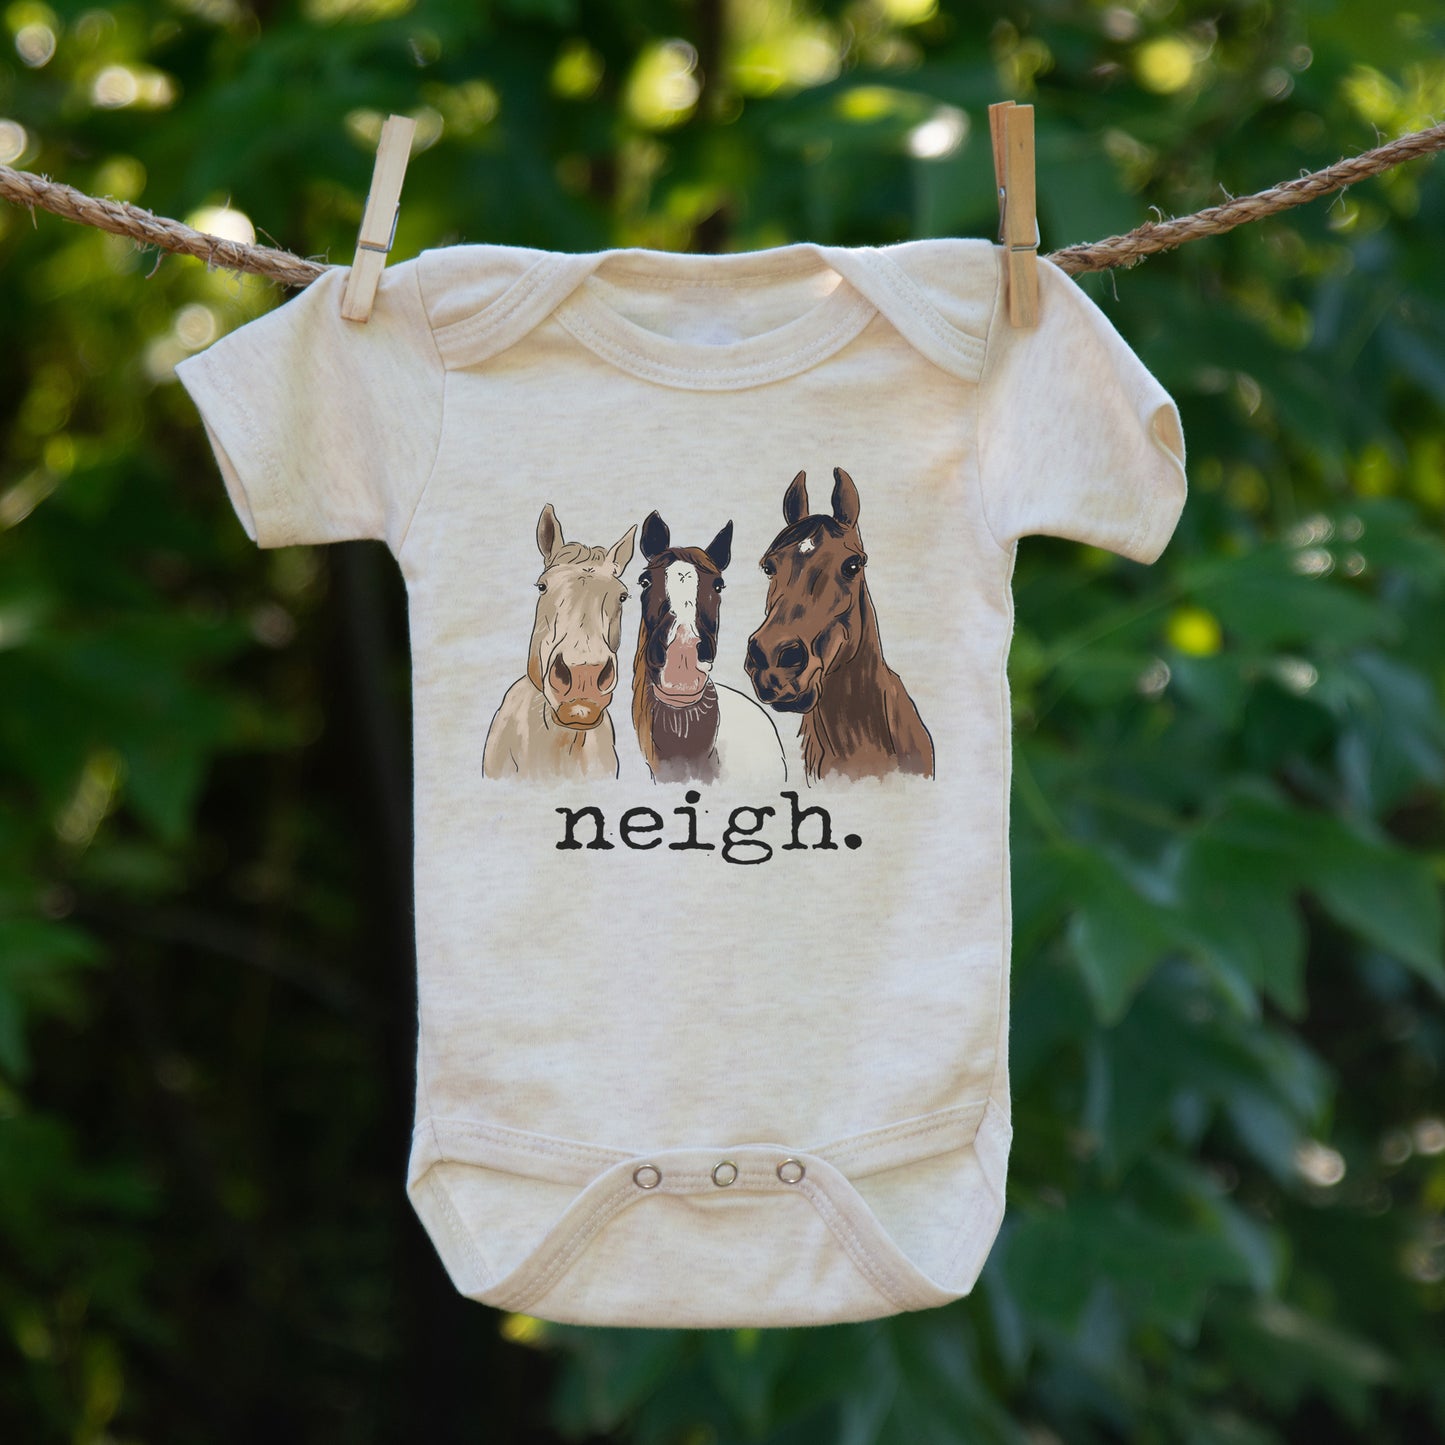 "Neigh" Three Horse Baby Body Suit